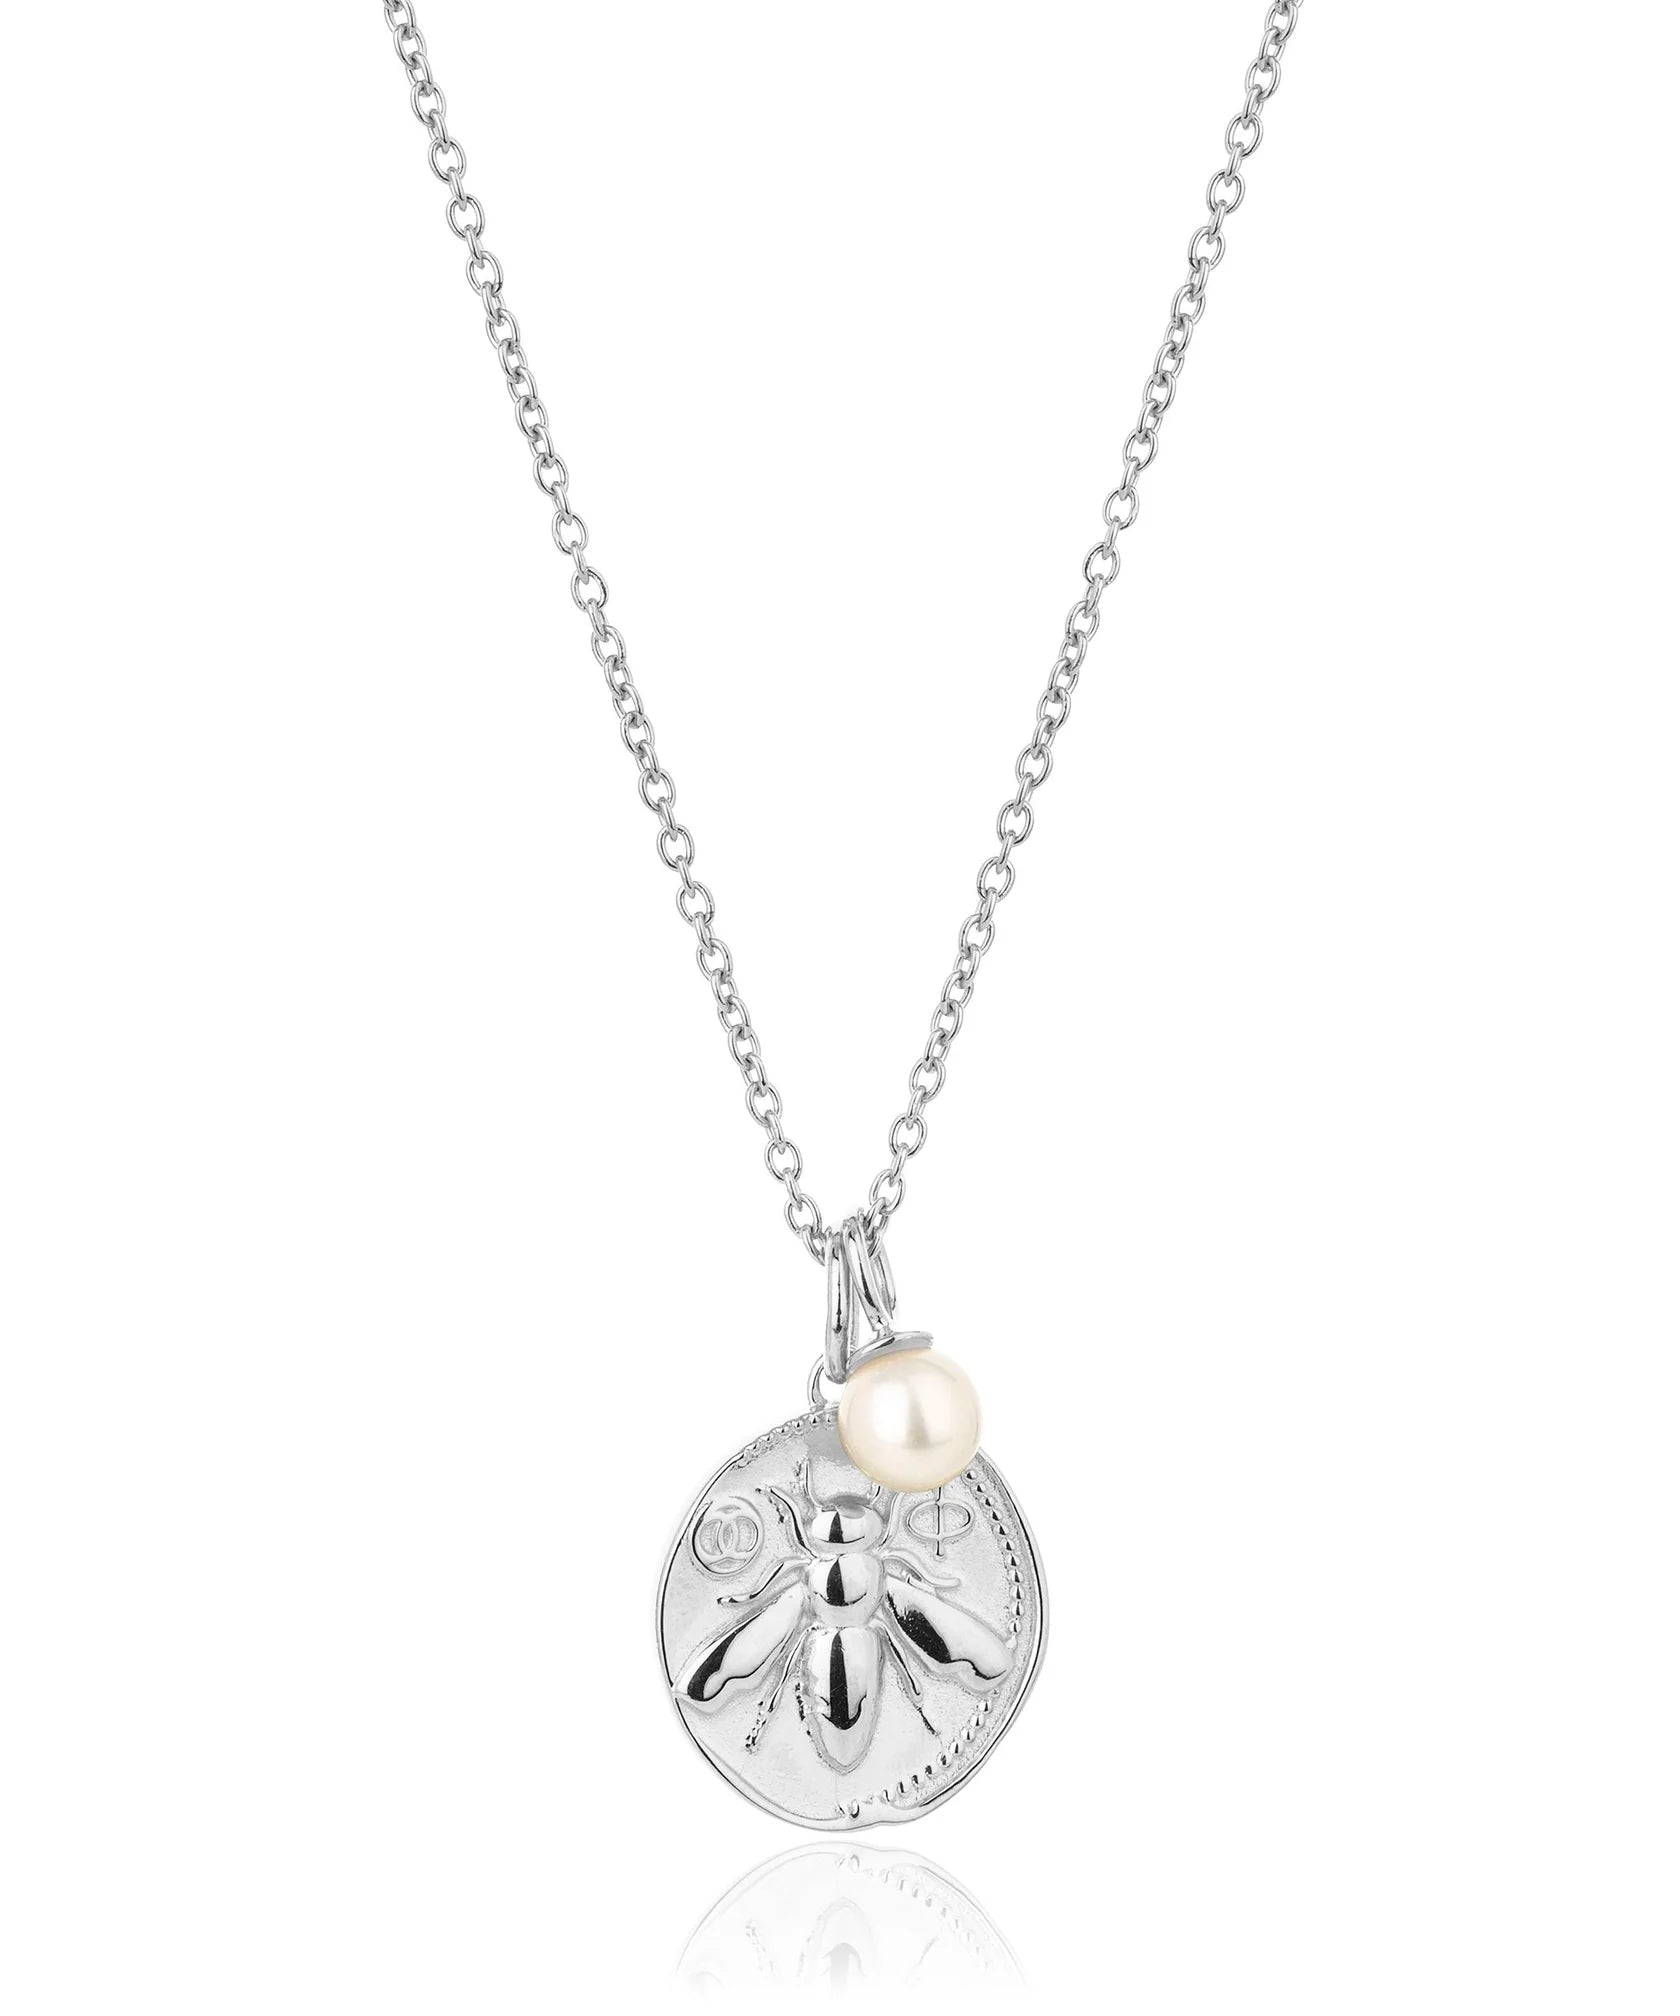 Silver bee coin pendant necklace with small rice pearl on silver chain